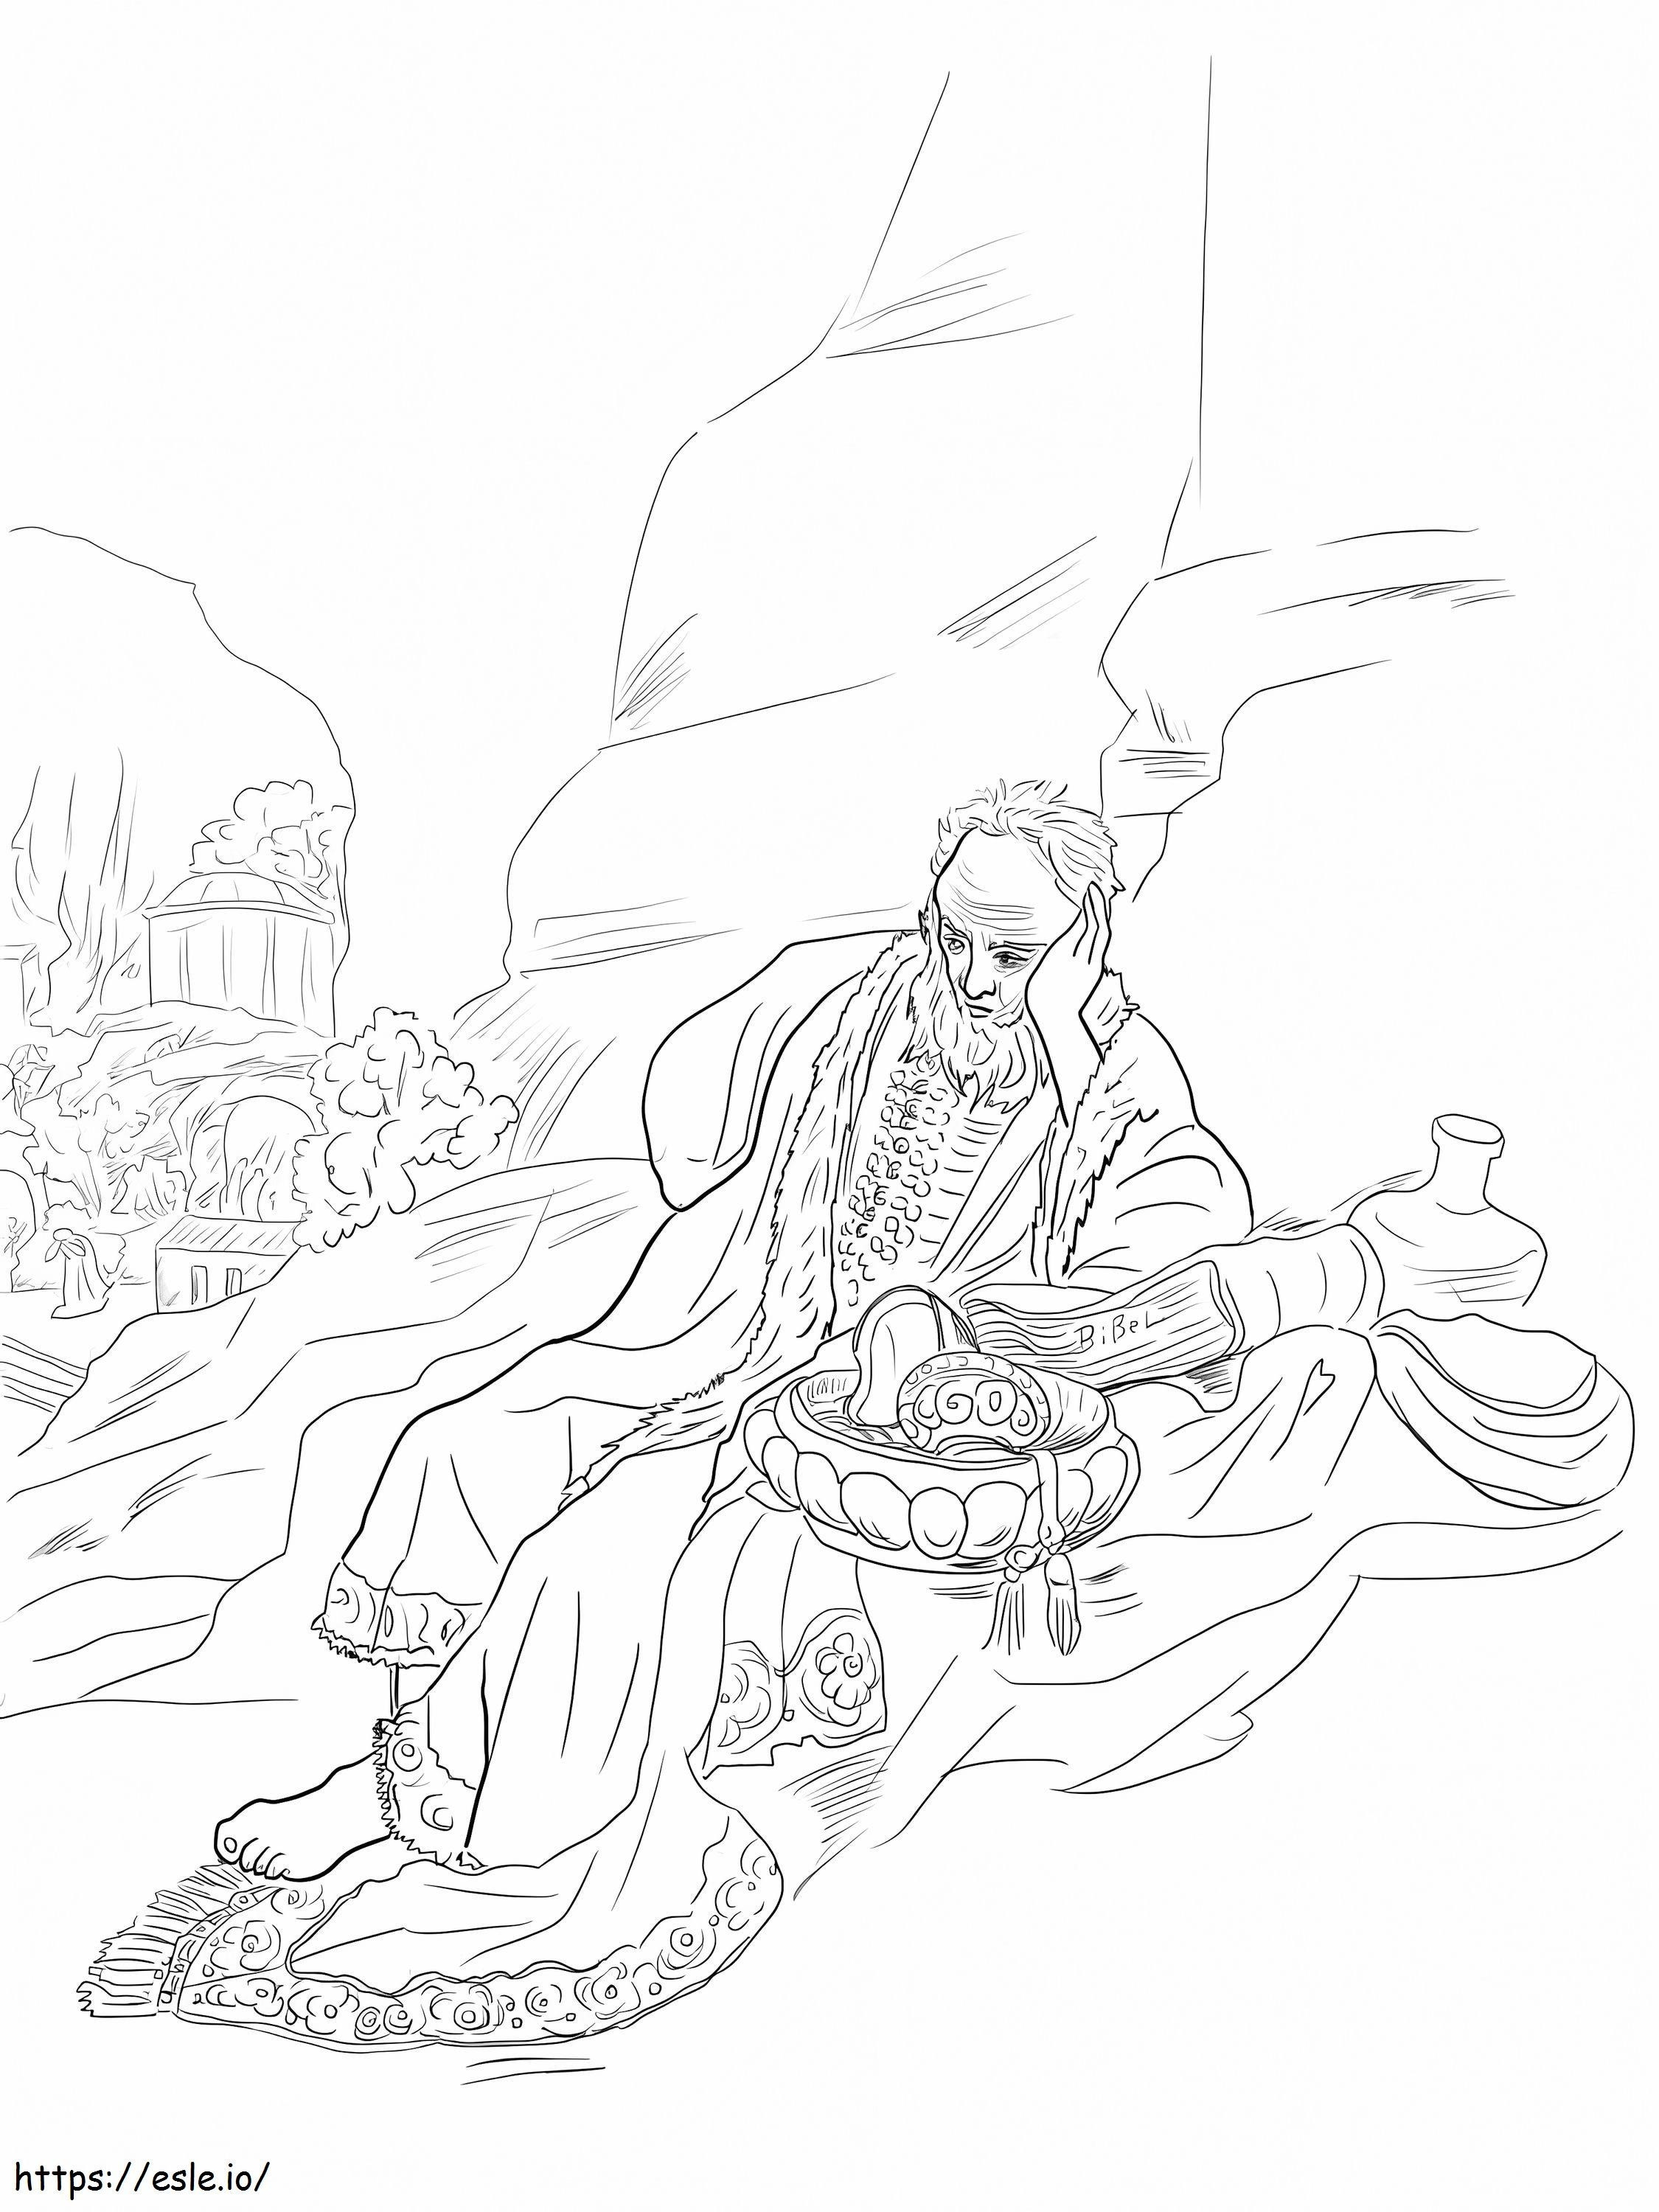 Jeremiah The Prophet coloring page